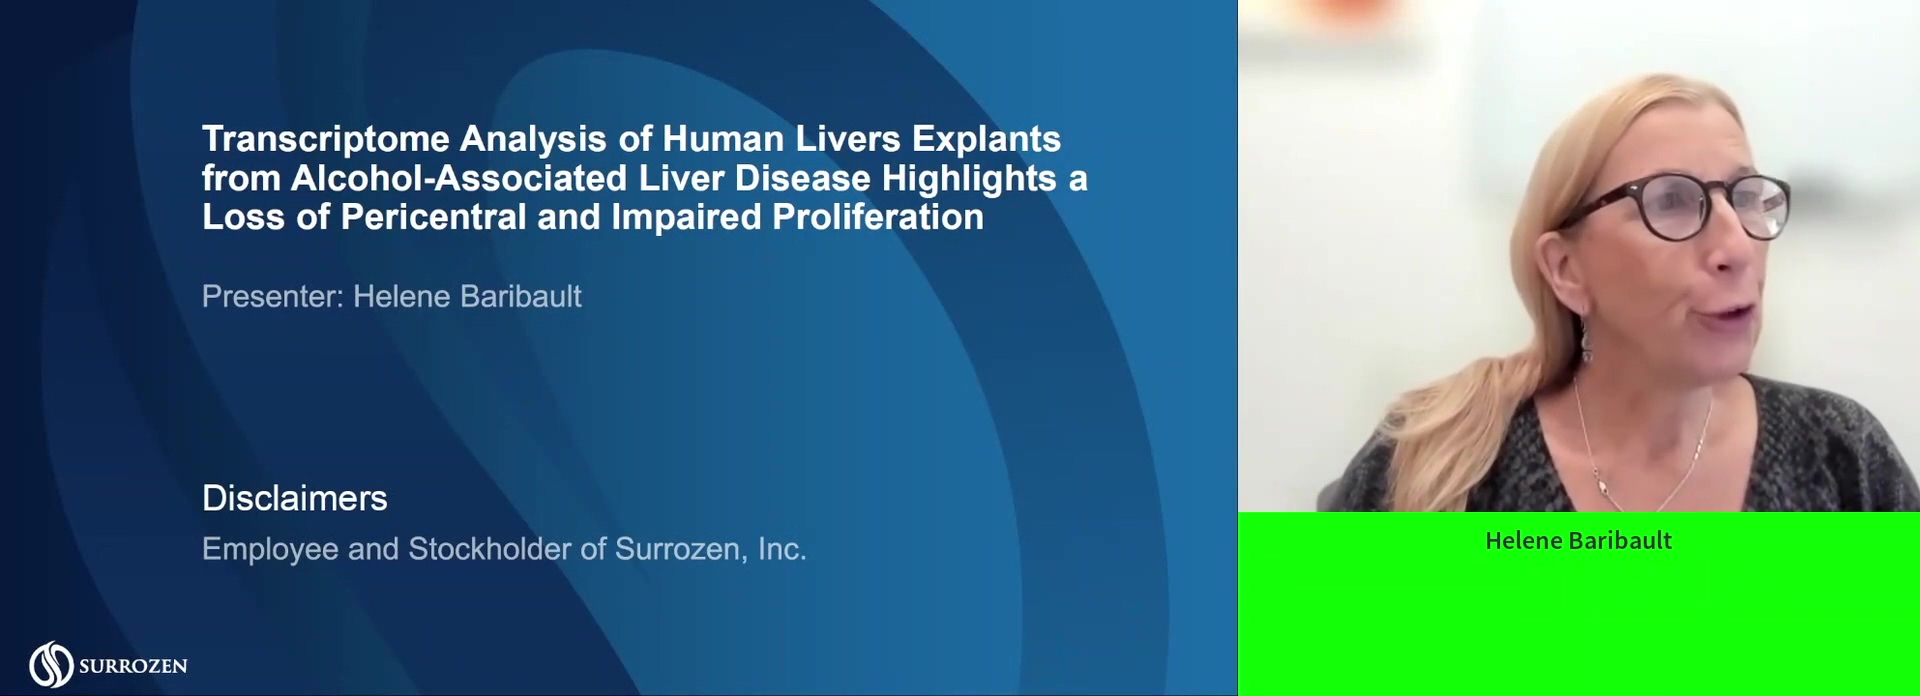 TRANSCRIPTOME ANALYSIS OF HUMAN LIVERS EXPLANTS FROM ALCOHOL-ASSOCIATED LIVER DISEASES HIGHLIGHTS A LOSS OF PERICENTRAL AND PROLIFERATION GENE EXPRESSION